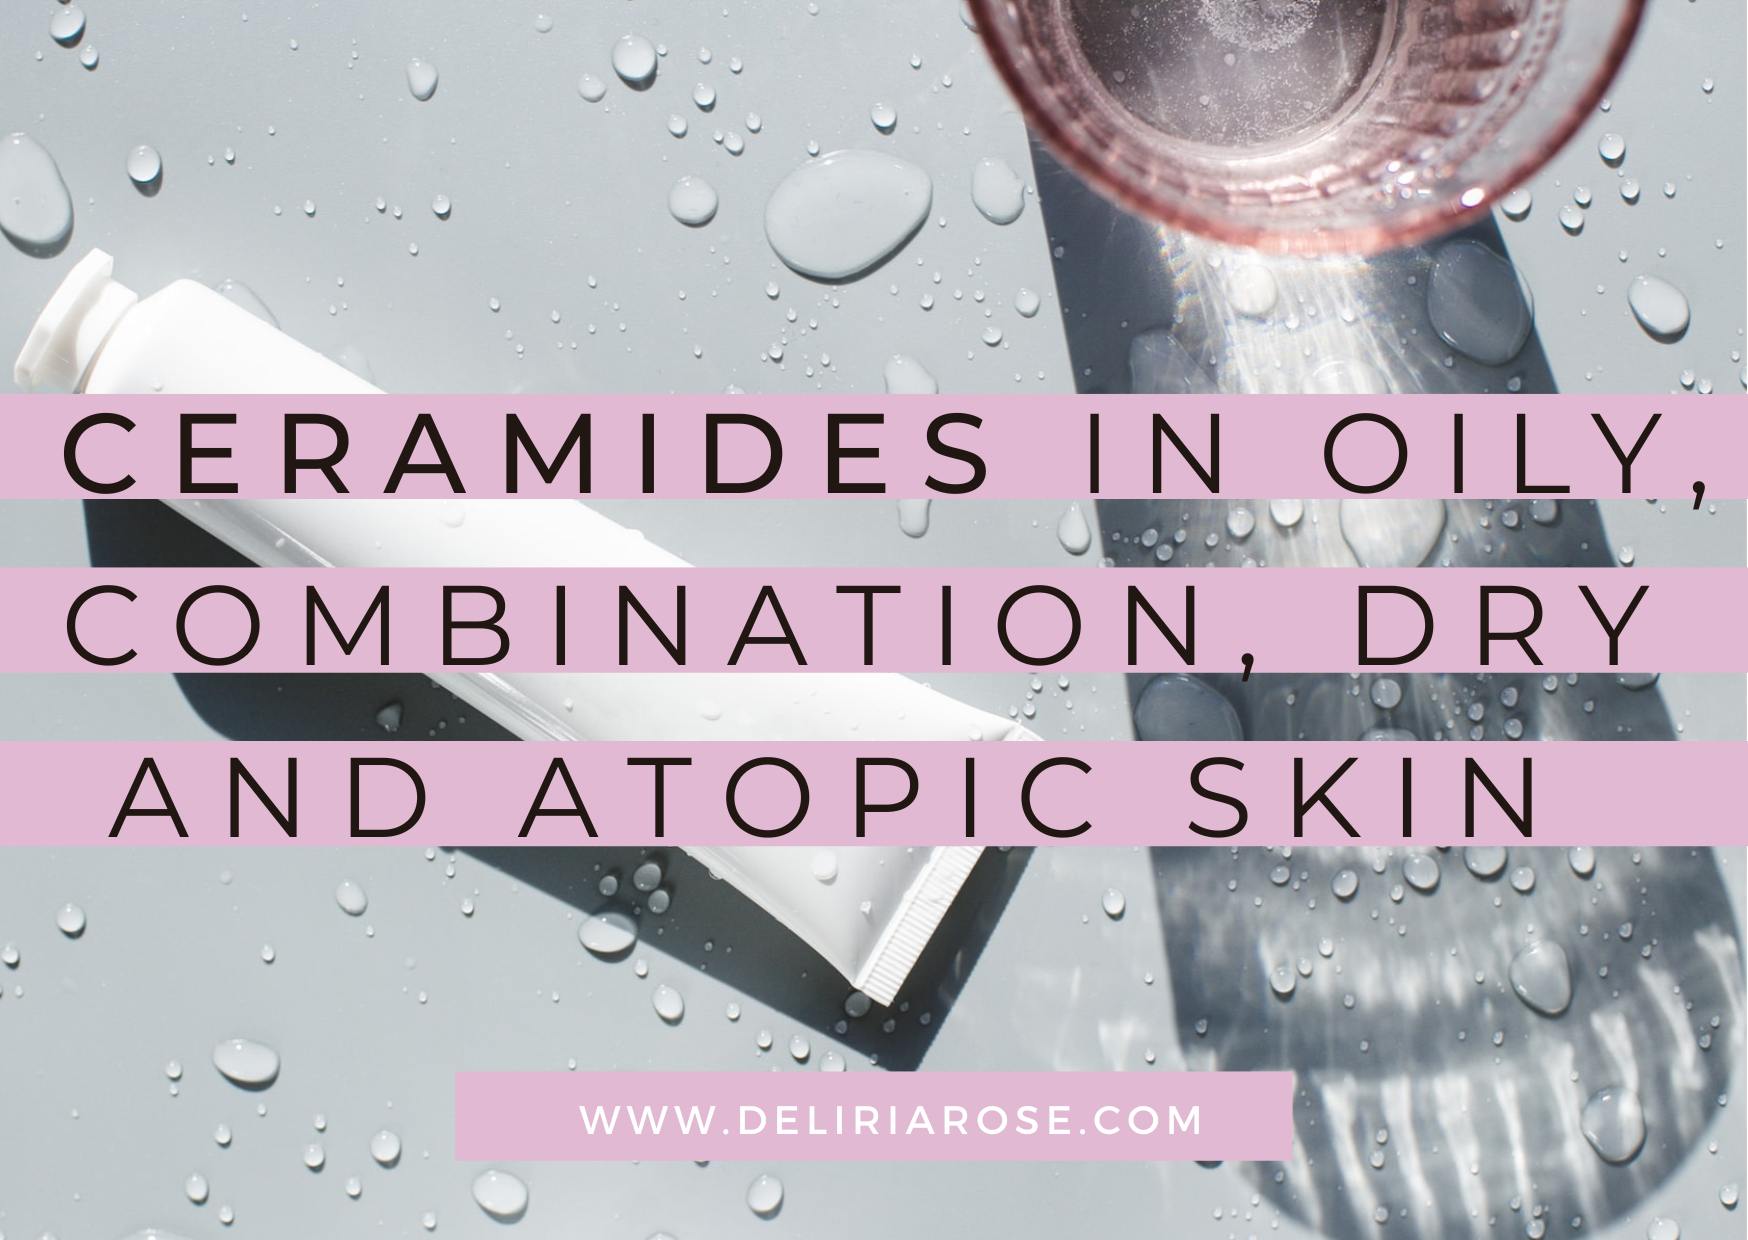 Ceramides and their benefits on oily, combination, dry and atopic skin